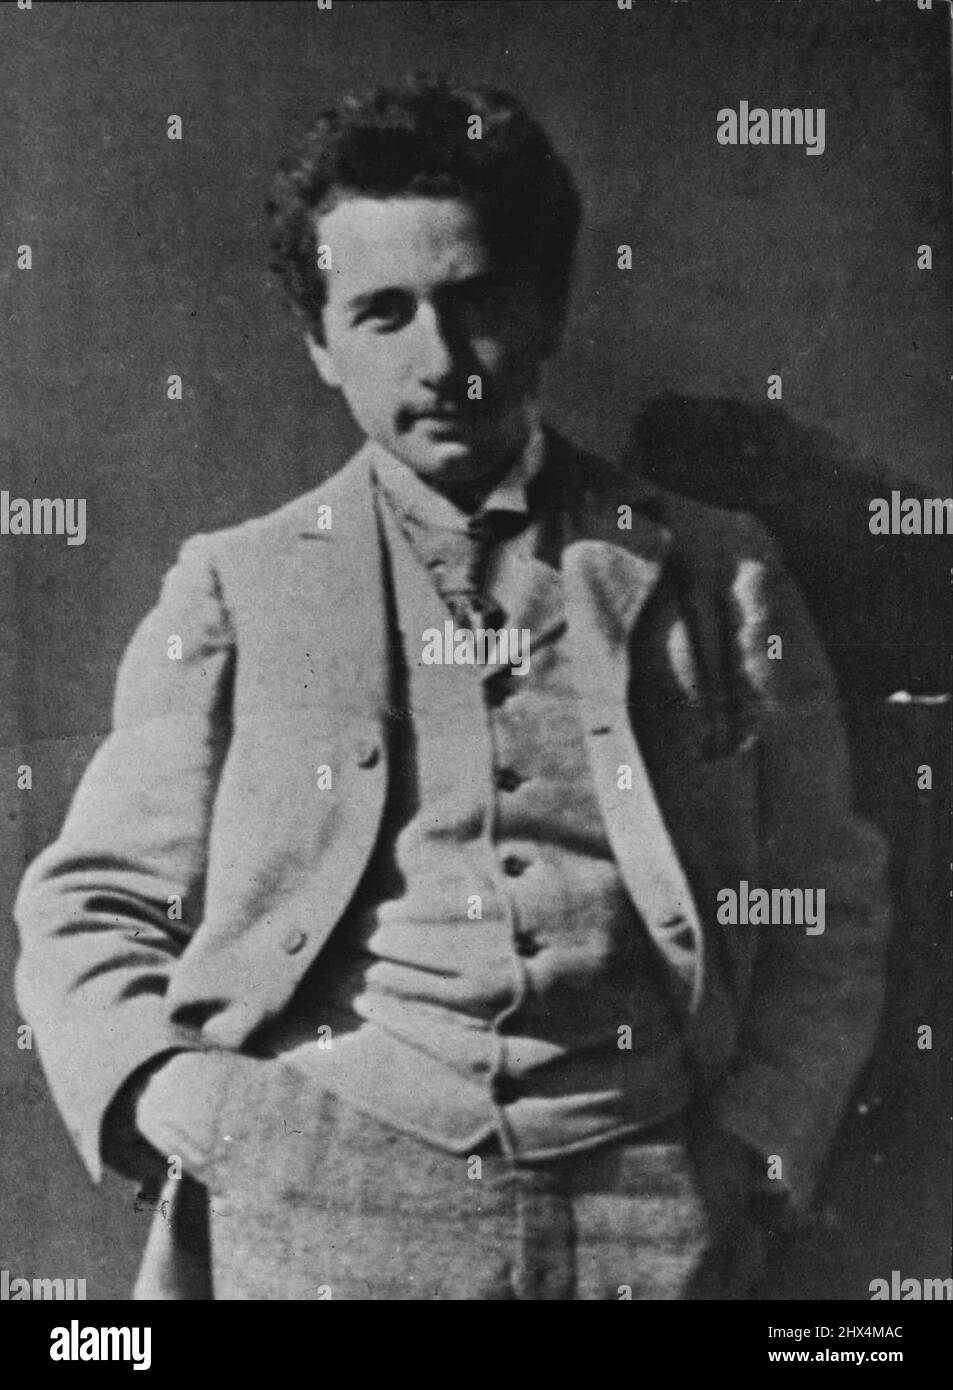 Prof. Albert Einstein in 1900. Photographed as student, aged 21, at Zuerich. October 3, 1950. (Photo by Camera Press). Stock Photo